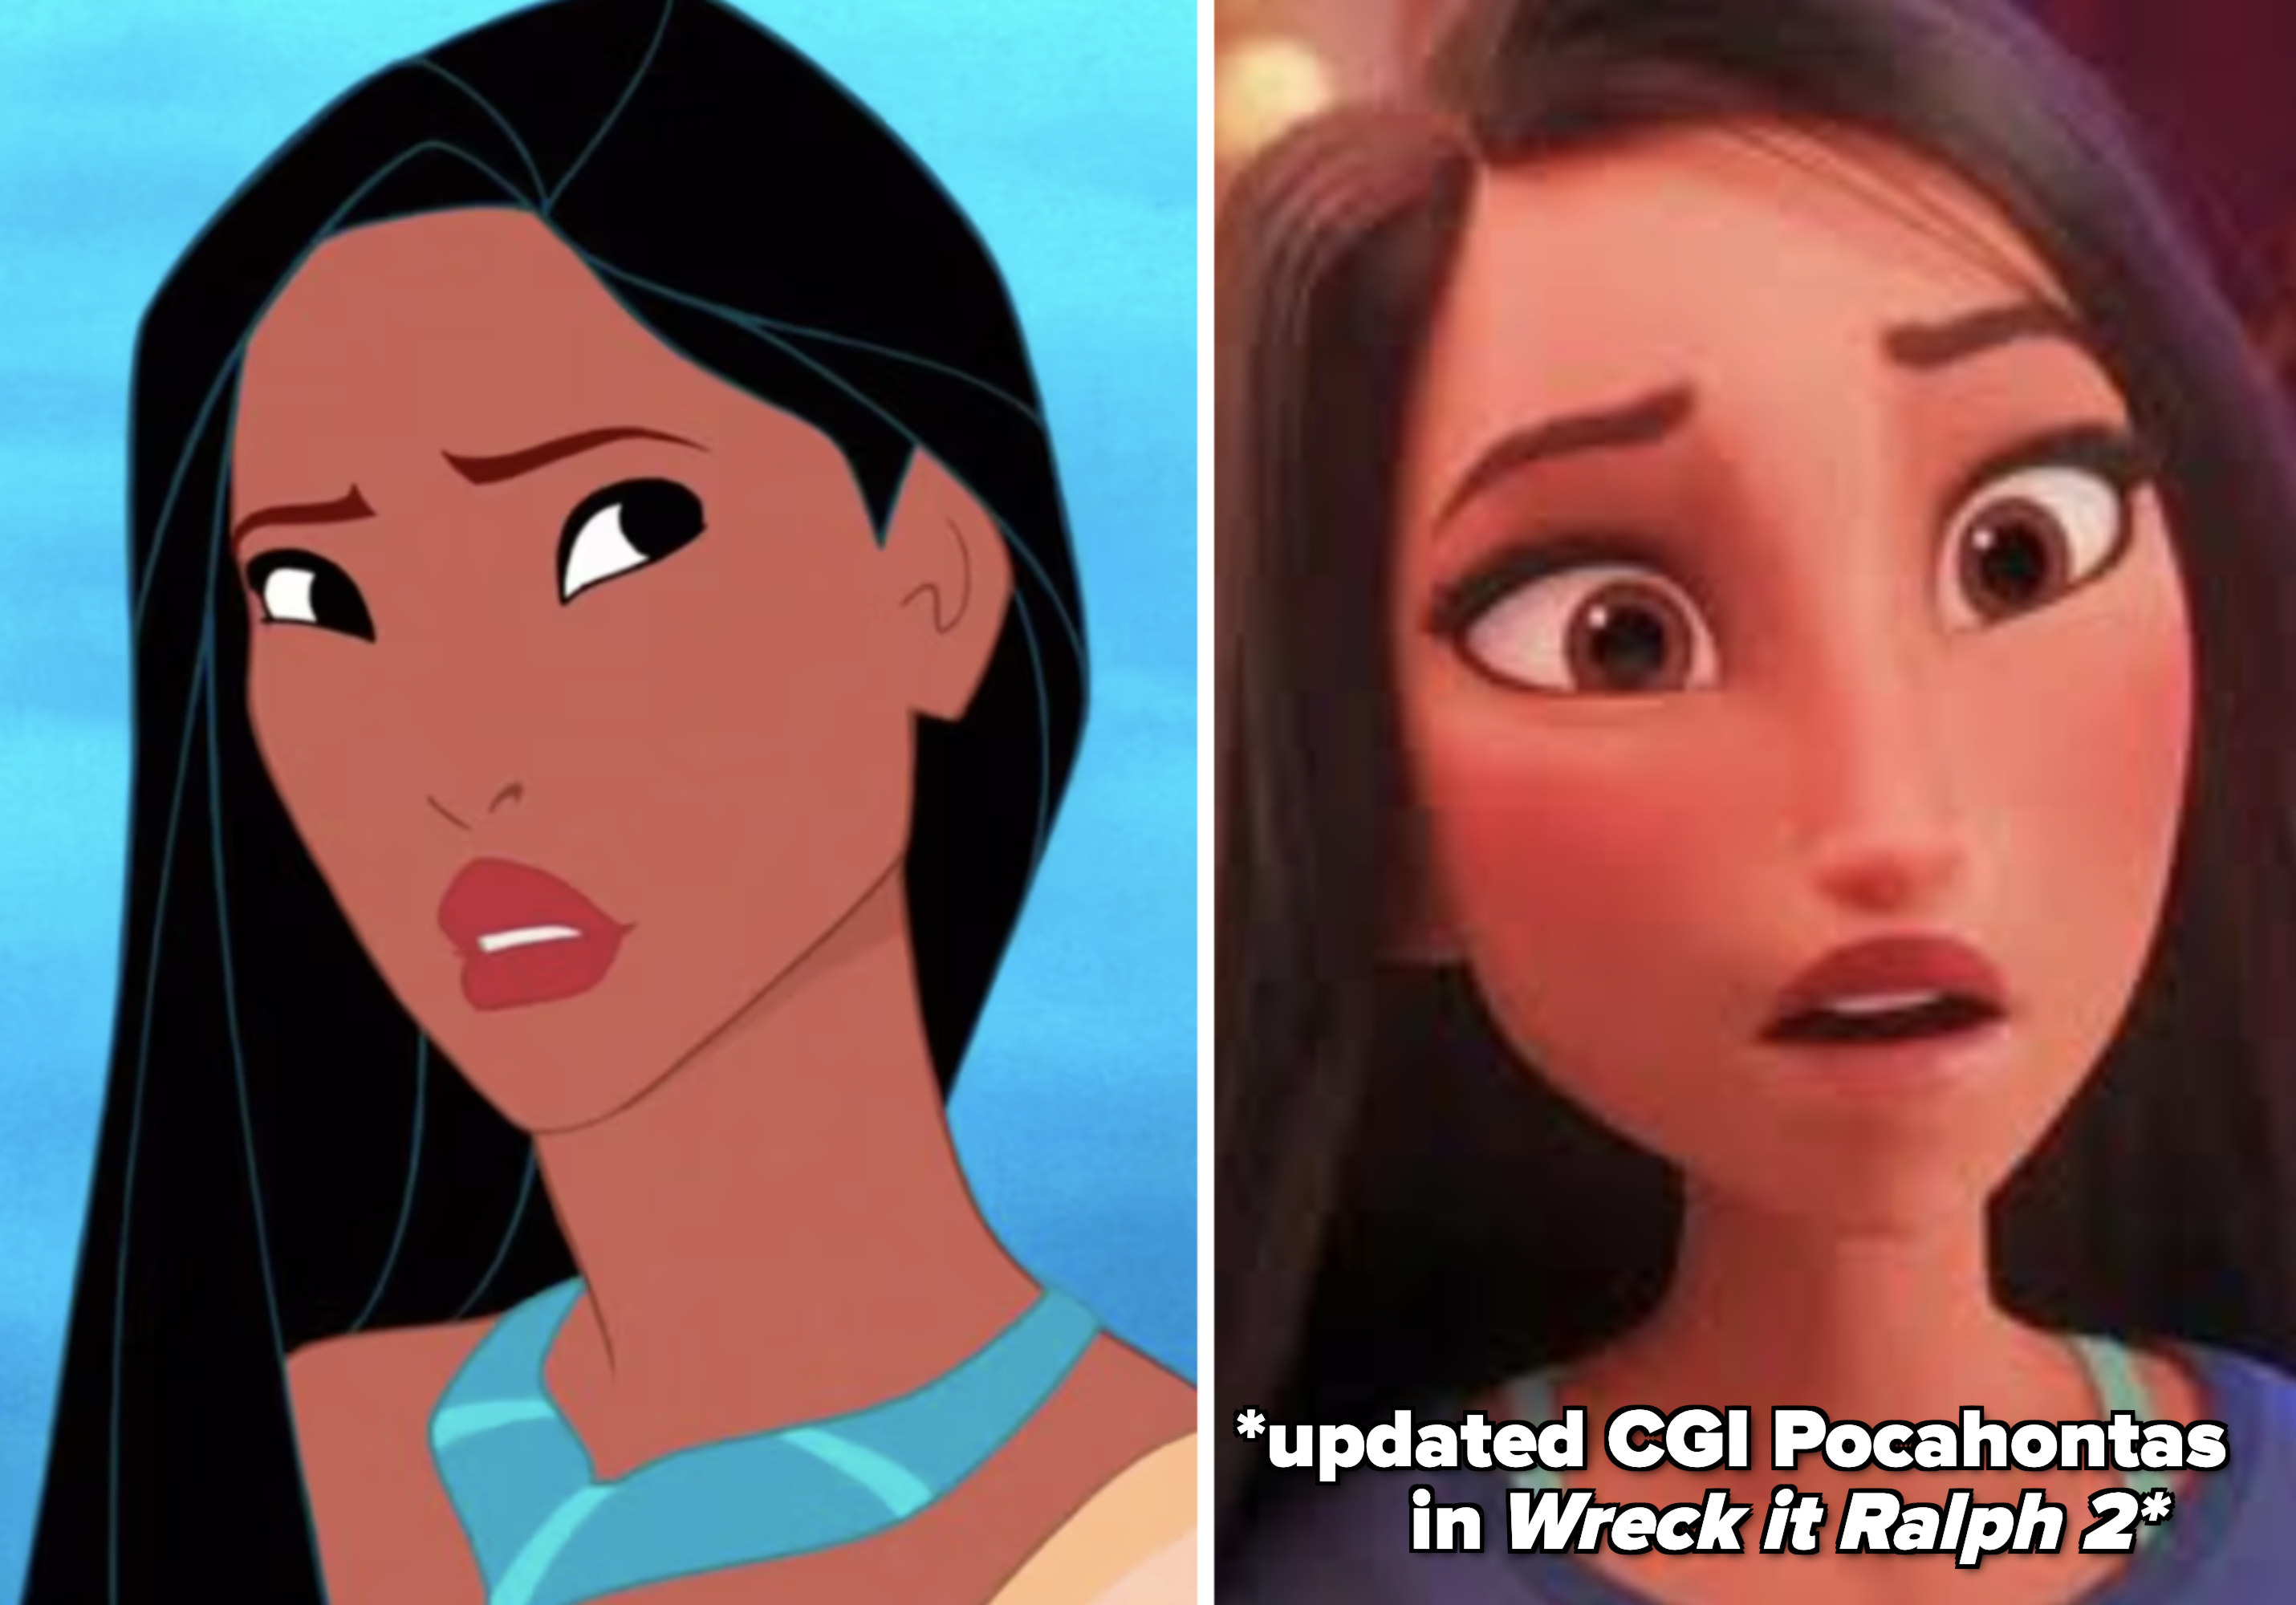 on the left pocahontas in the original animated film. on the right pocahontas in wreck it ralph 2